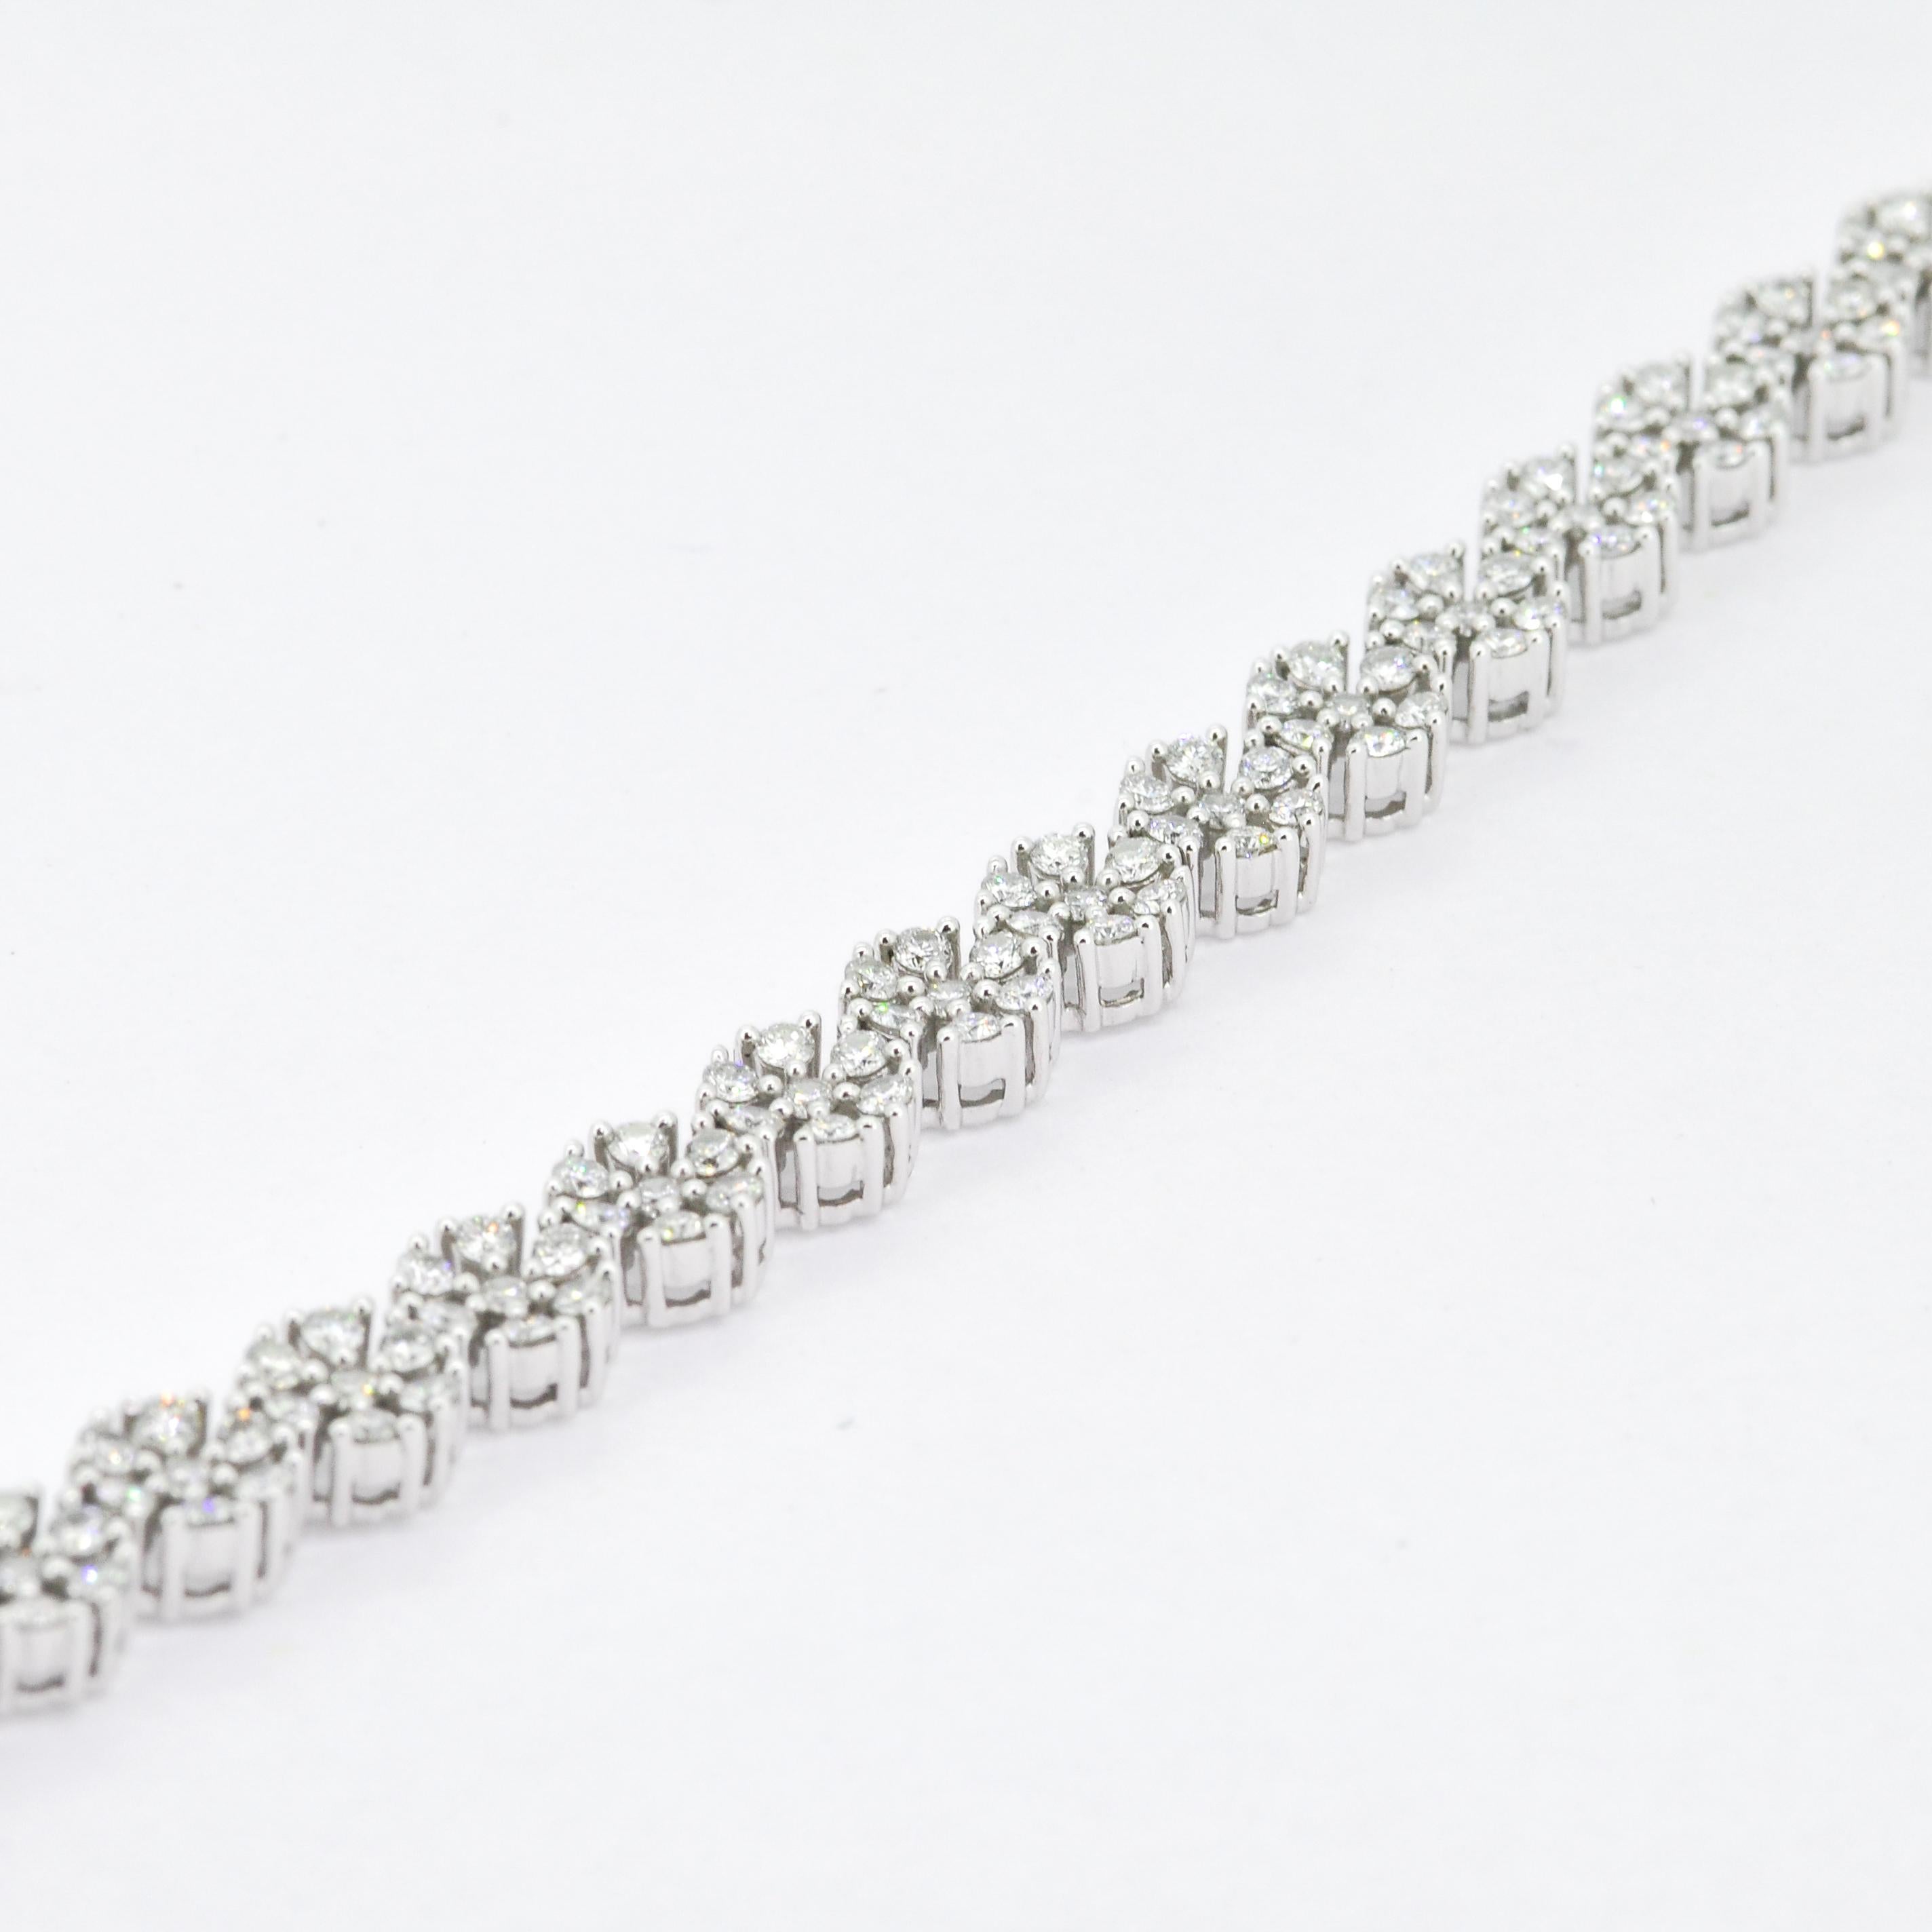 Crafted in 18K white gold, this spectacular diamonds - each artfully set to enhance size and sparkle - to make it each piece look like a flower. Beautifully Handcrafted with such Precision! 

The centerpiece of this bracelet is its flower pattern,